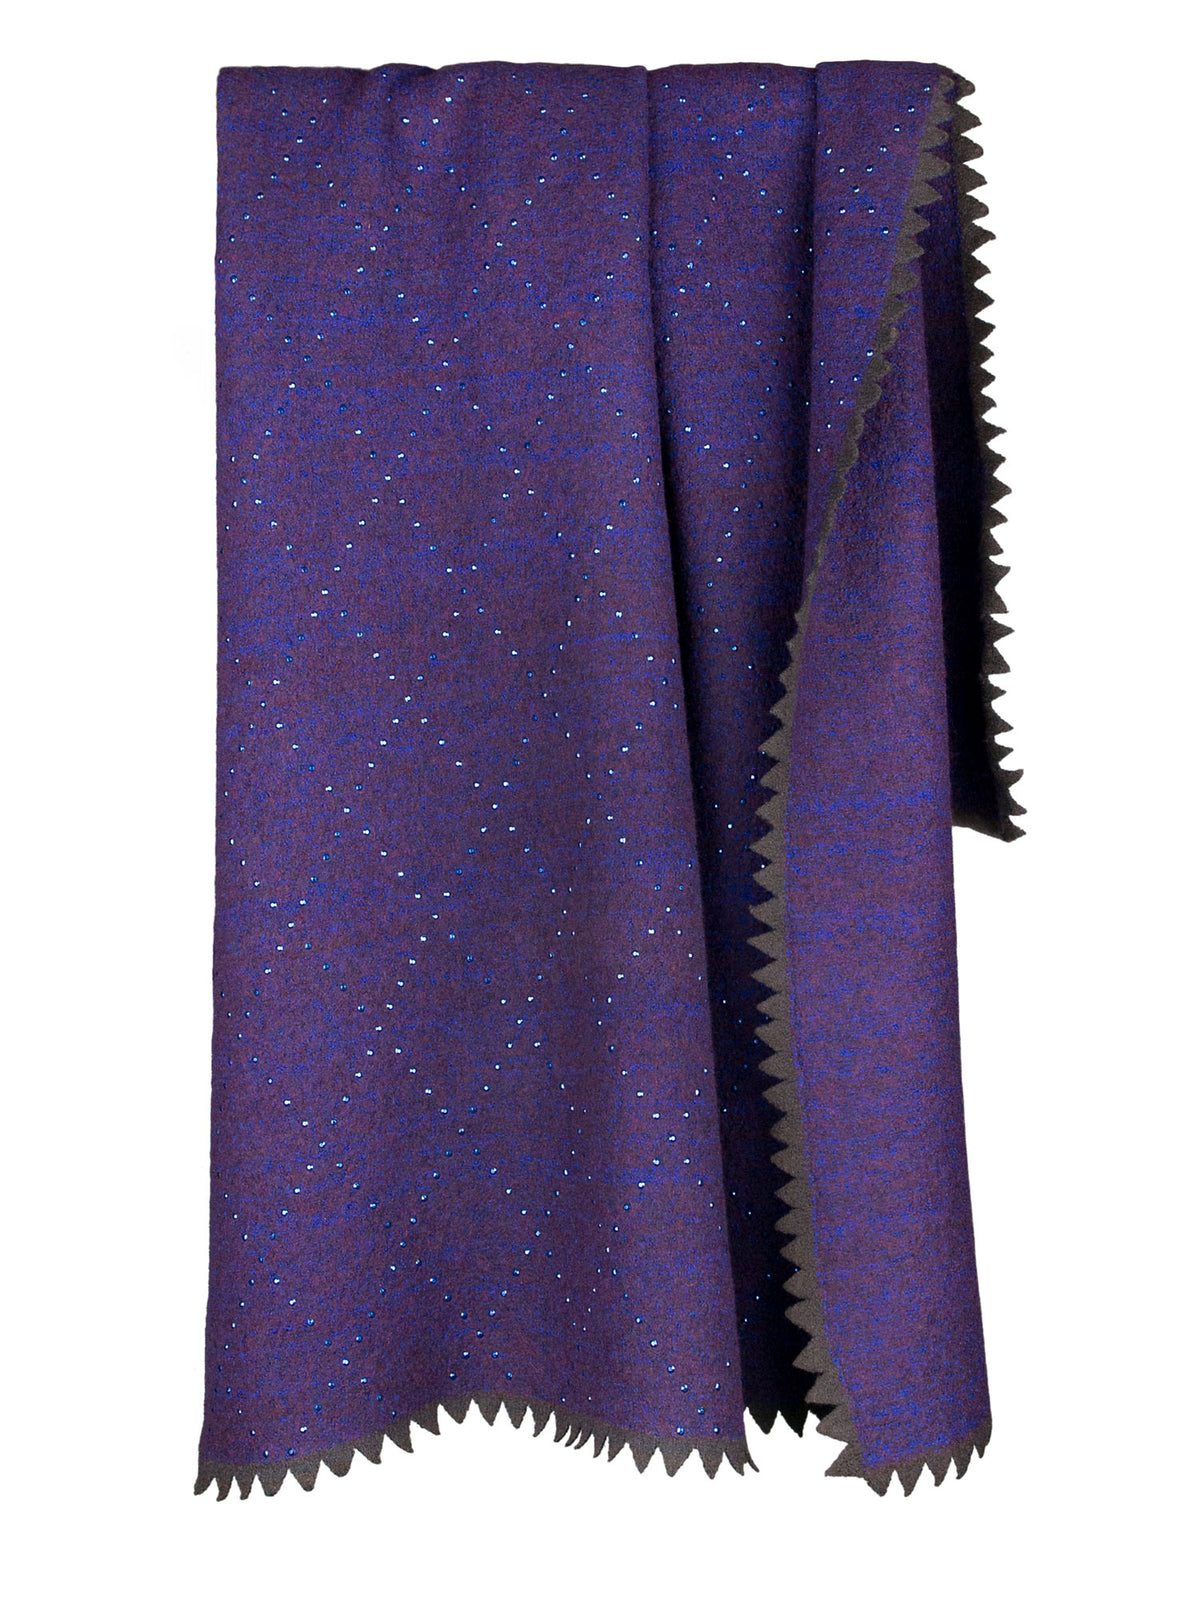 Deep Purple Merino Boucle Knitted Throw embellished with sapphire metal faceted rhinestones.